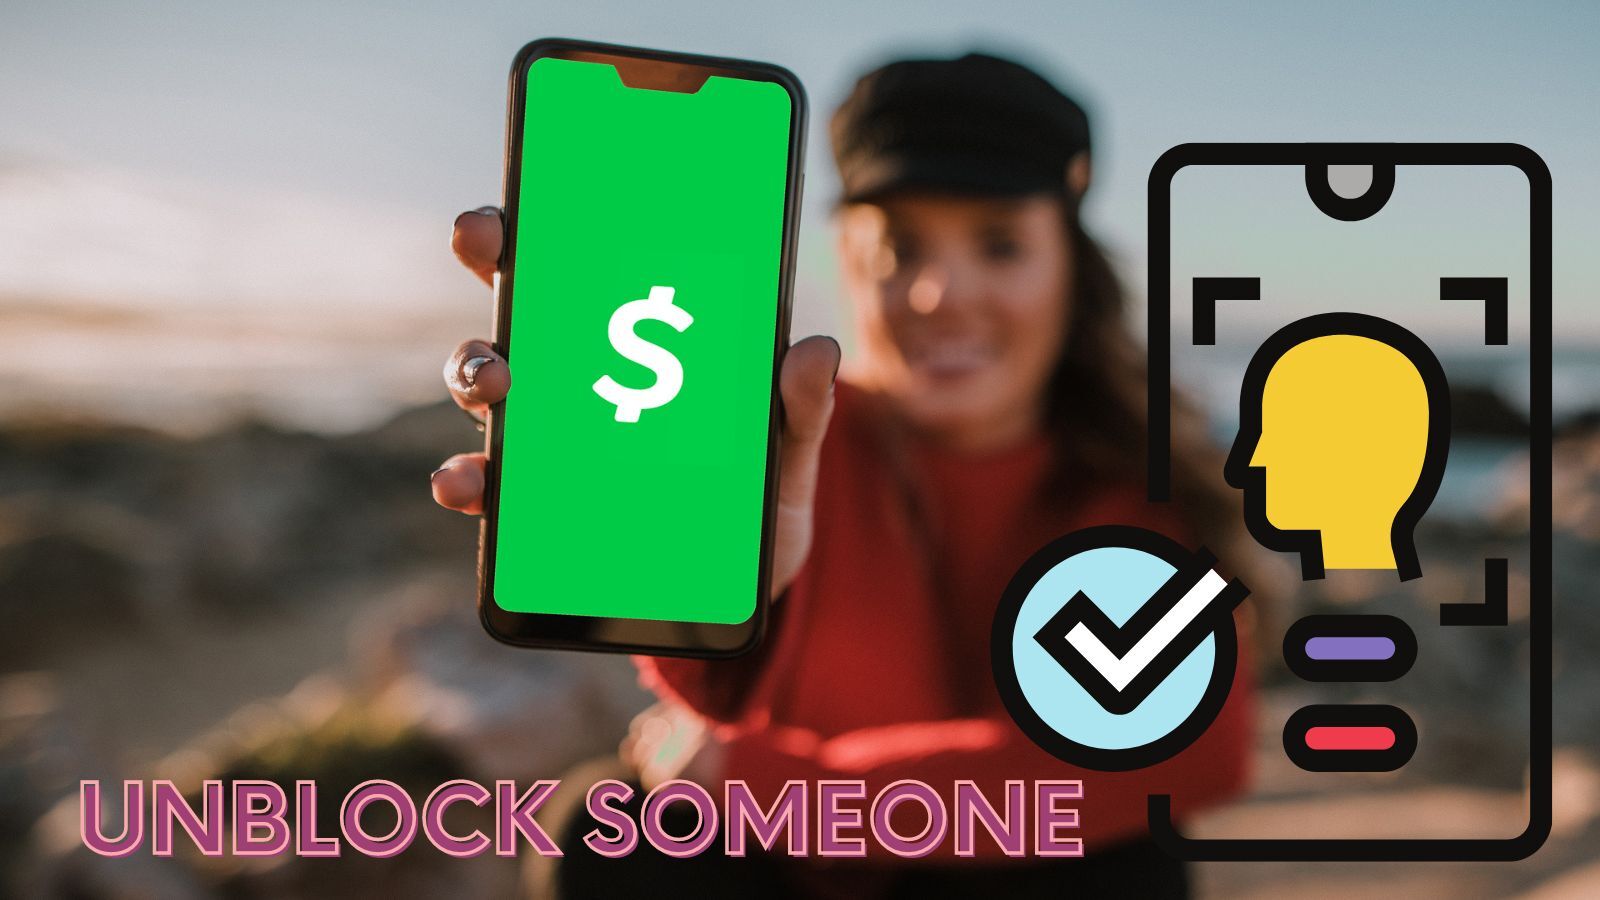 How to Unblock Someone on Cash App? (A Step-by-Step Guide)